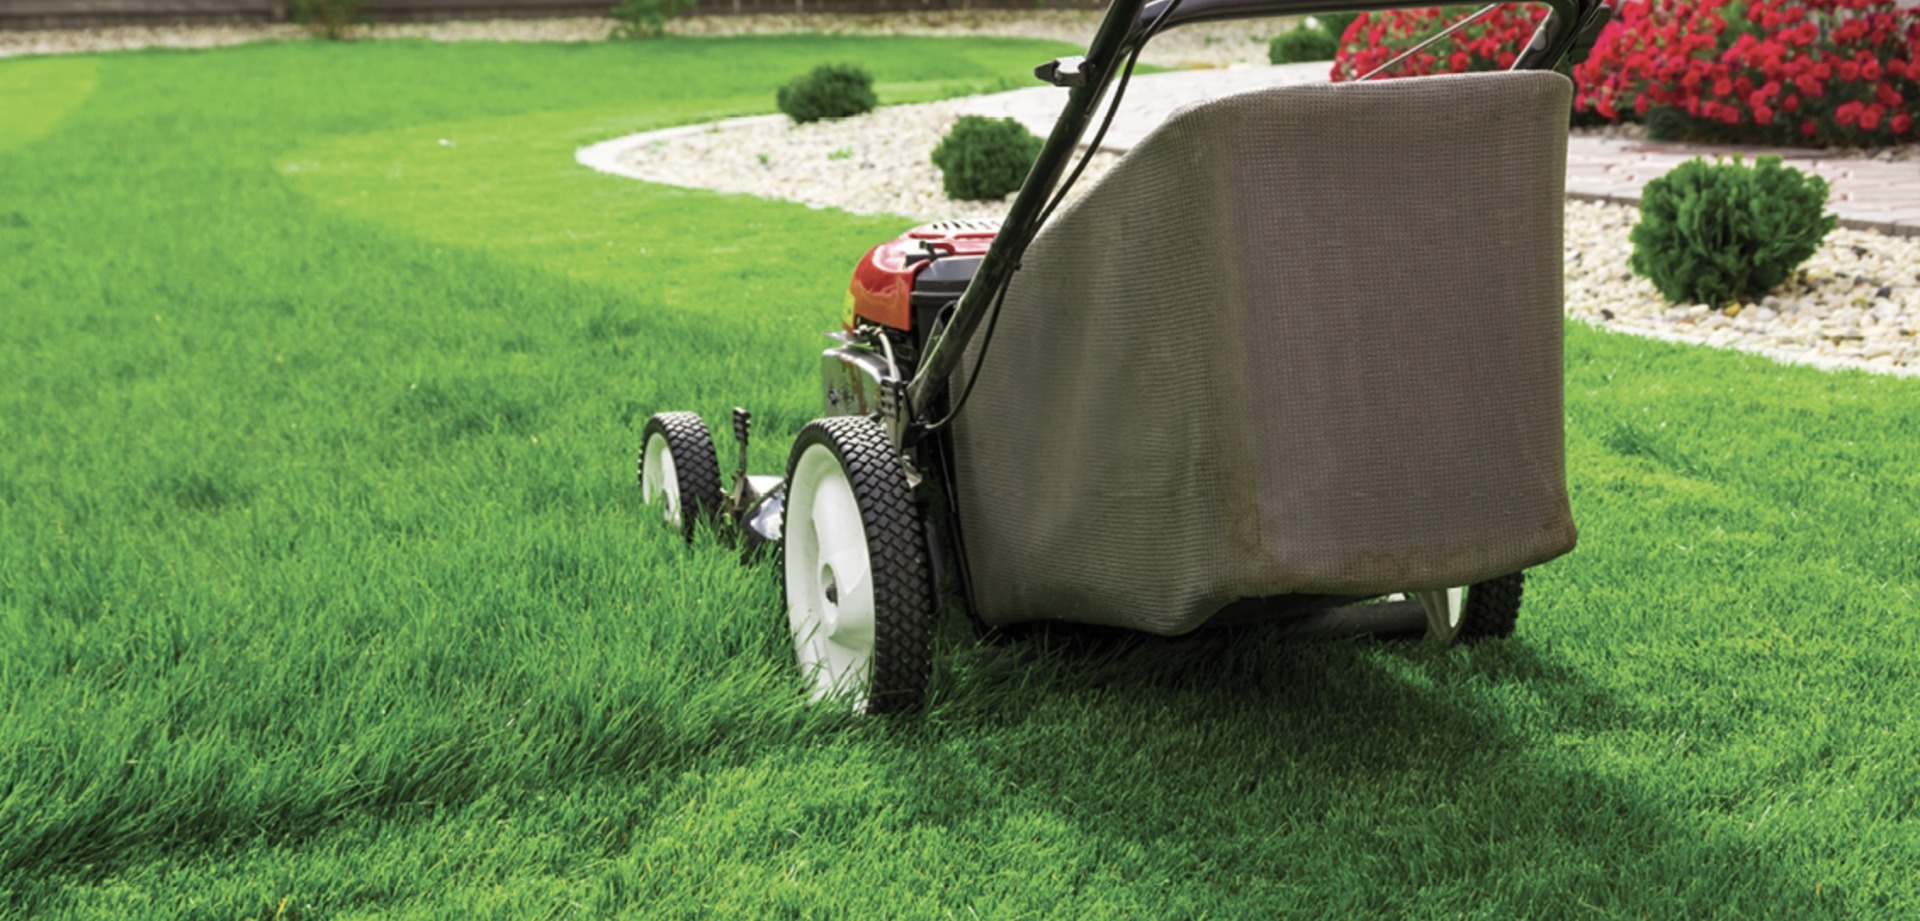 12 Mowing Tips for the Perfect Cut Every Time